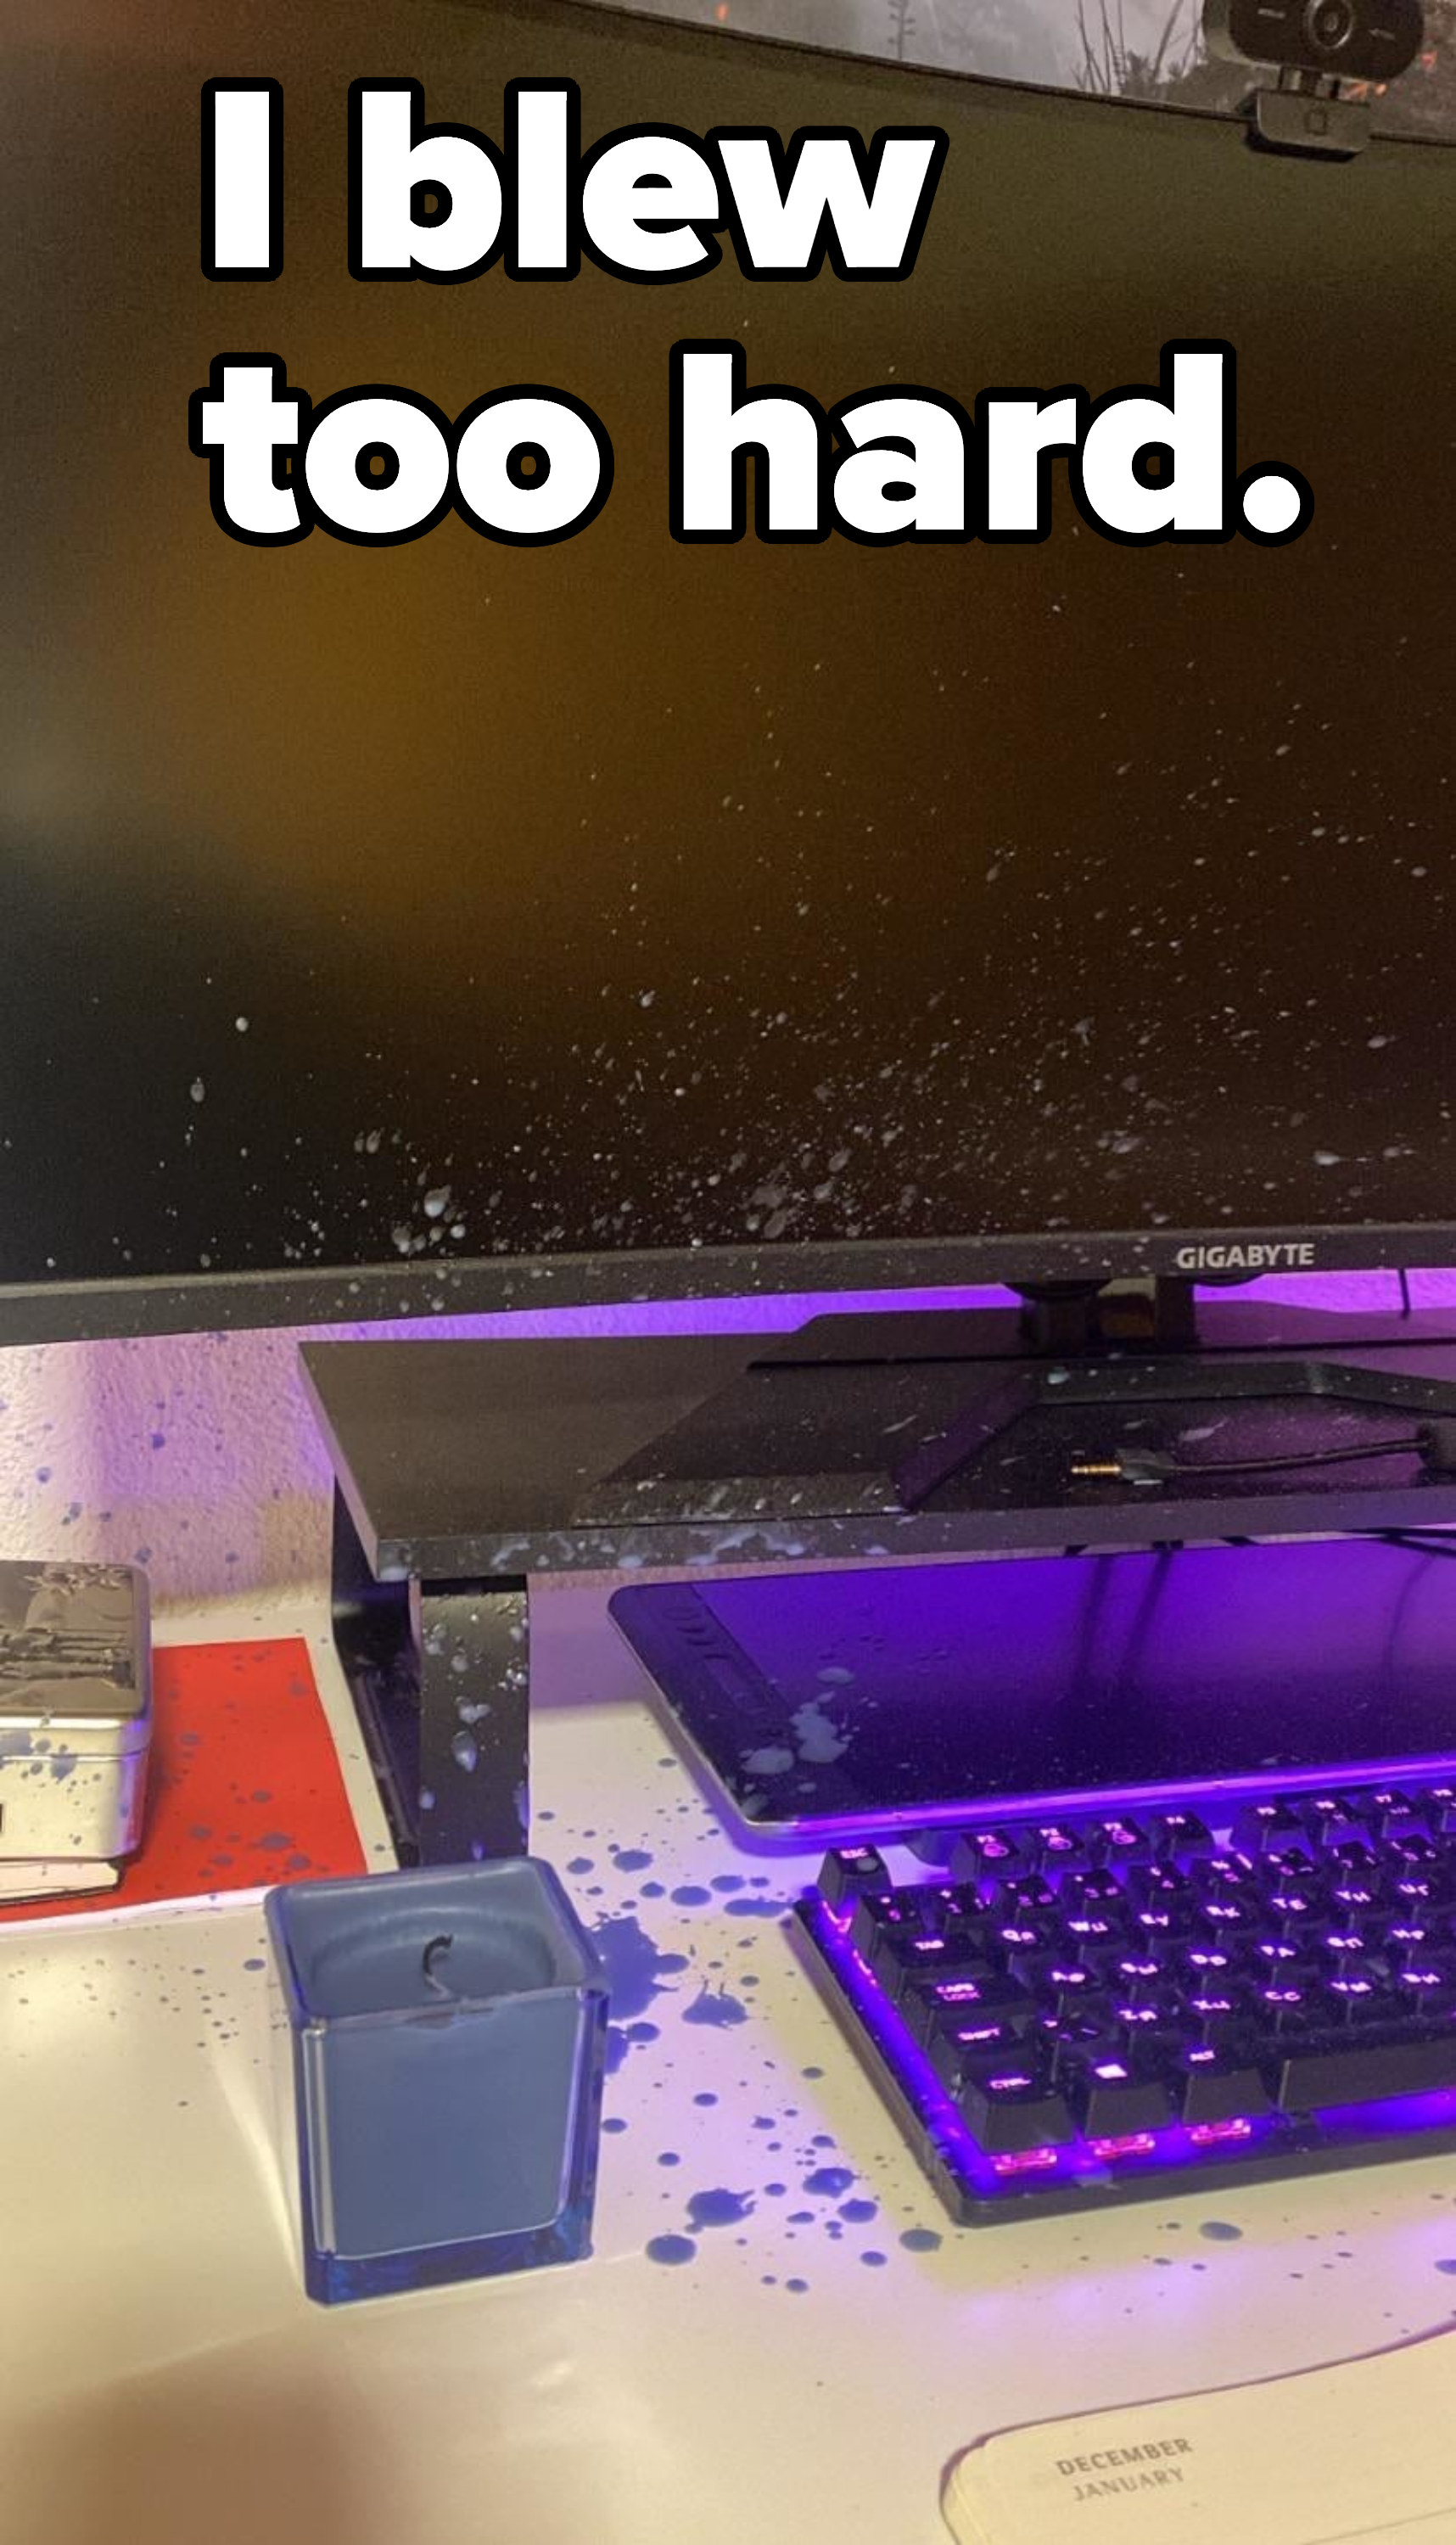 Candle wax all over a keyboard and monitor